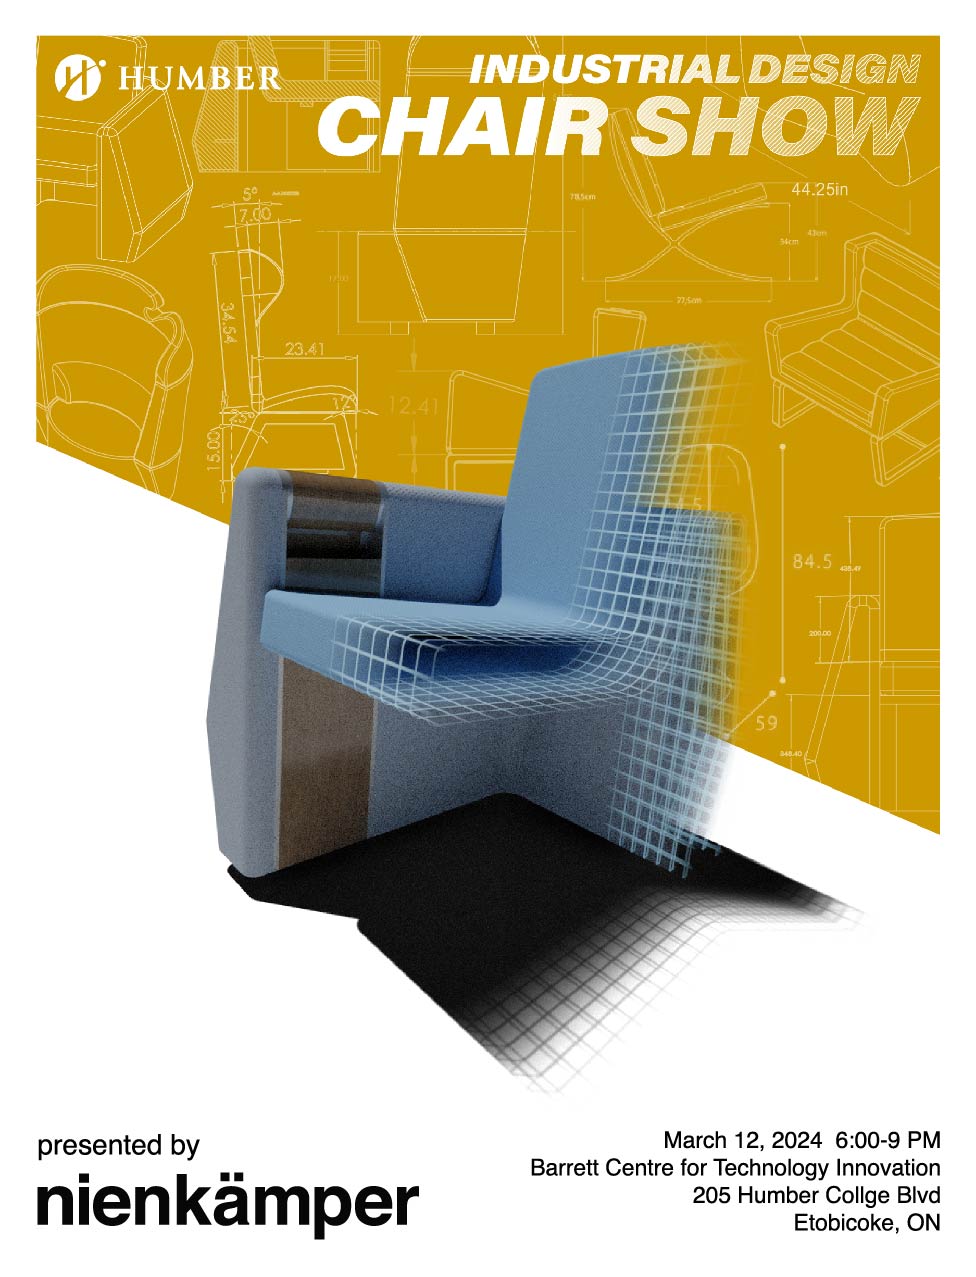 3D rendering of a blue chair